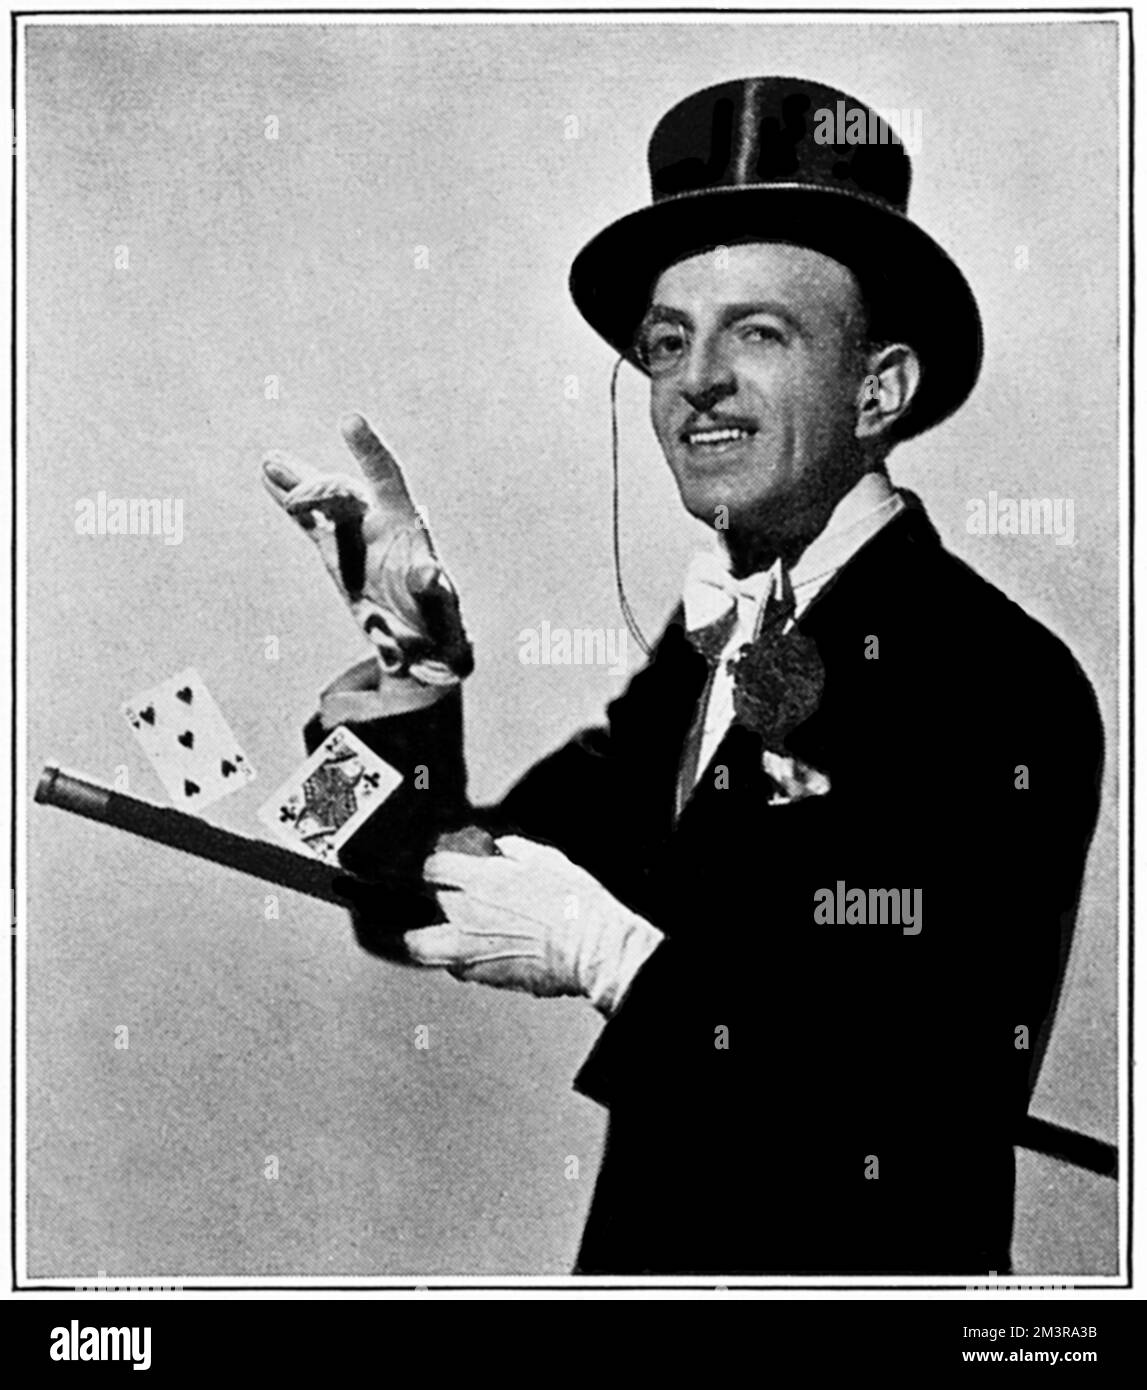 Cardini - Magician (Richard Valentine Pitchford) (1895-1973). Born and raised in Britain (and having served in the British Army in WW1), he worked chiefly in the United States of America, achieving fame combining magic with a very entertaining stage performance, setting the template for many magicians and conjurors in the following decades.     Date: 1937 Stock Photo